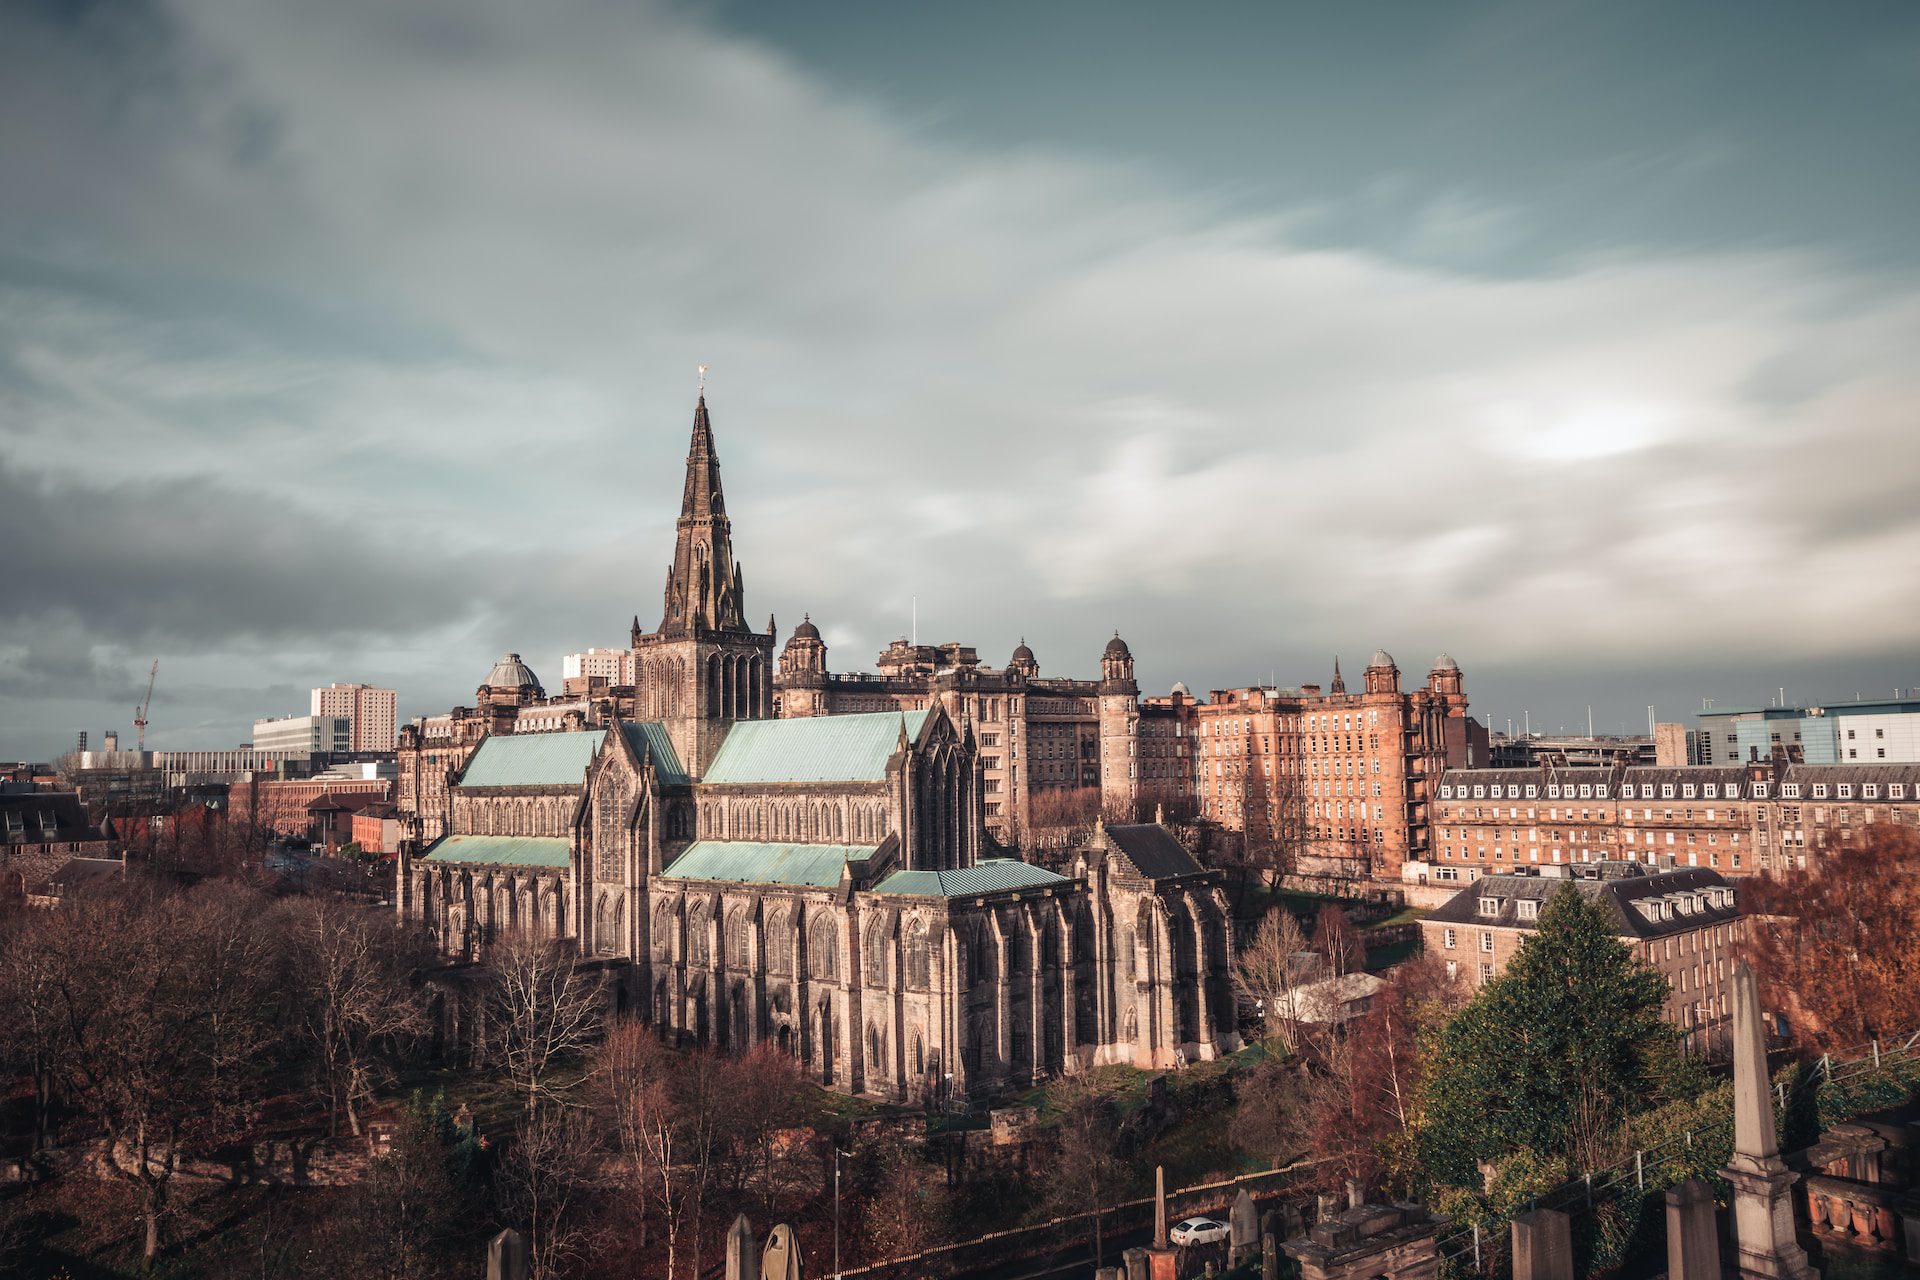 A view of Glasgow Cathedral on a cloud day, with trees to the left and city buildings behind.